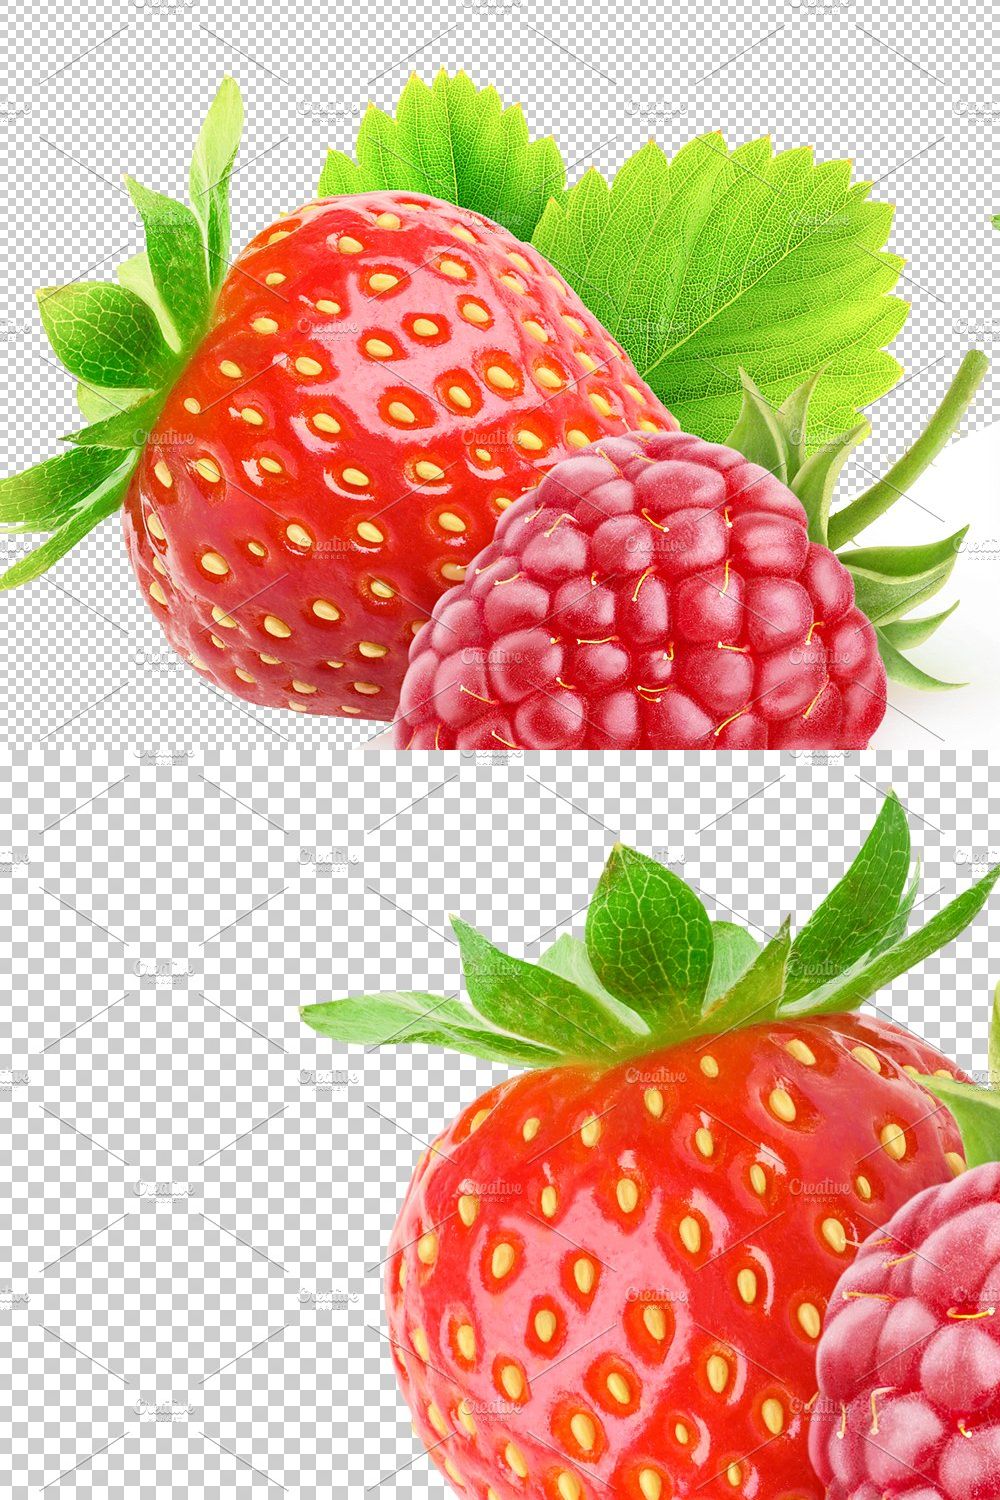 Strawberry and raspberry pinterest preview image.